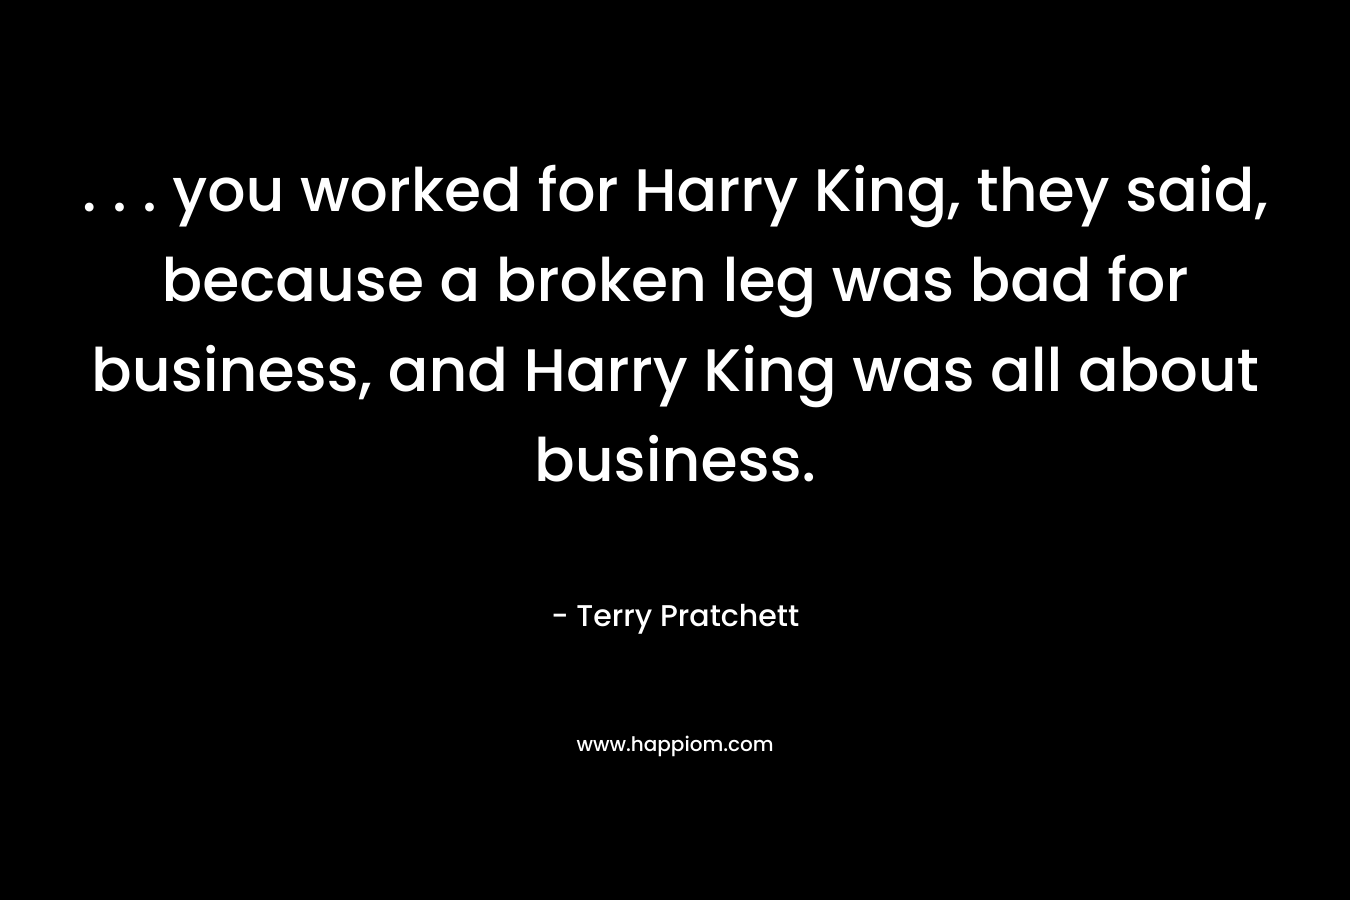 . . . you worked for Harry King, they said, because a broken leg was bad for business, and Harry King was all about business.